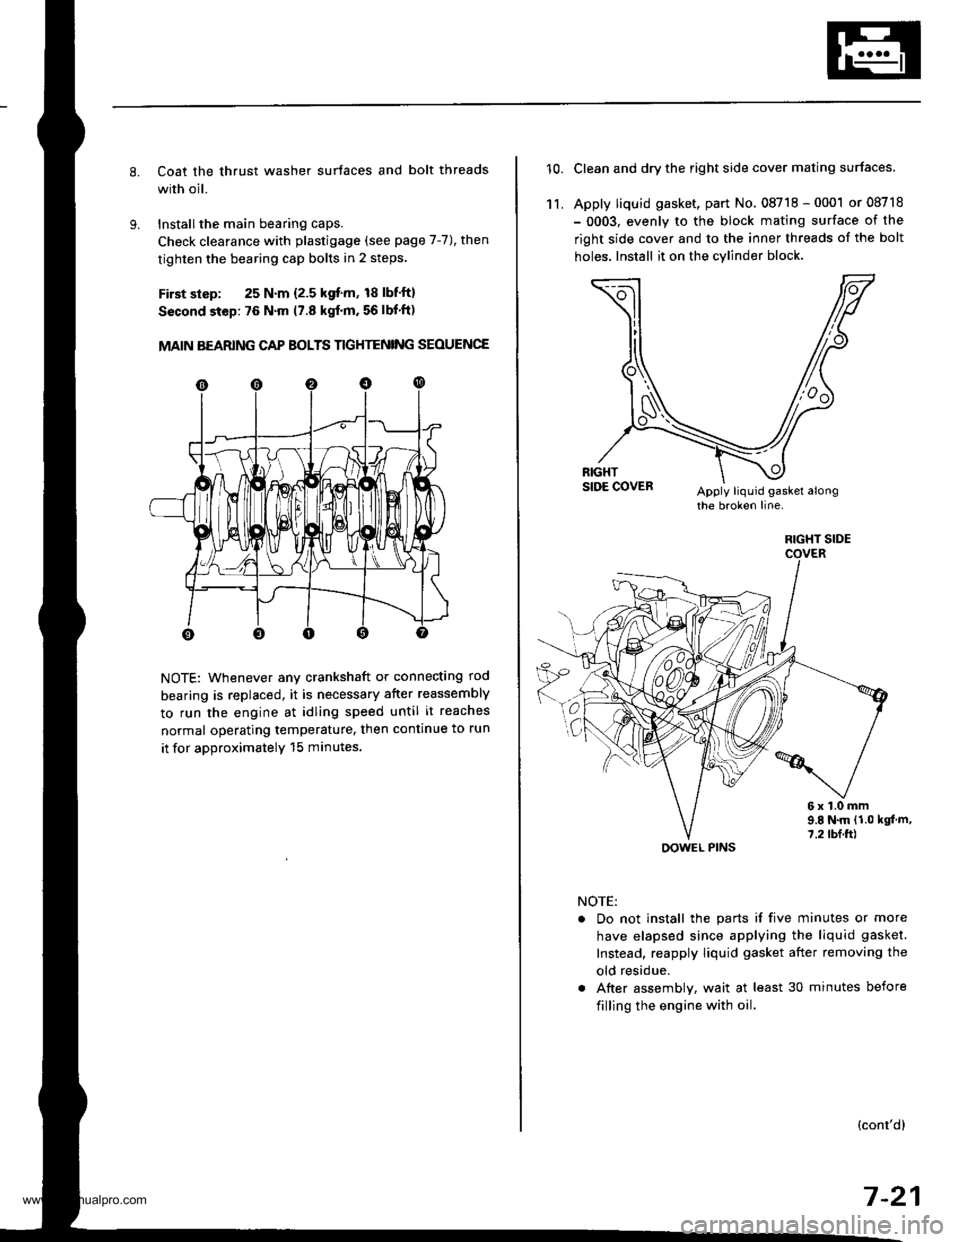 HONDA CR-V 2000 RD1-RD3 / 1.G Workshop Manual 
Coat the thrust washer surtaces and bolt threads
with oil.
Installthe main bearing caps.
Check clearance with plastigage (see page 7-7), then
tighten the bearing cap bolts in 2 steps.
First slsp: 25 